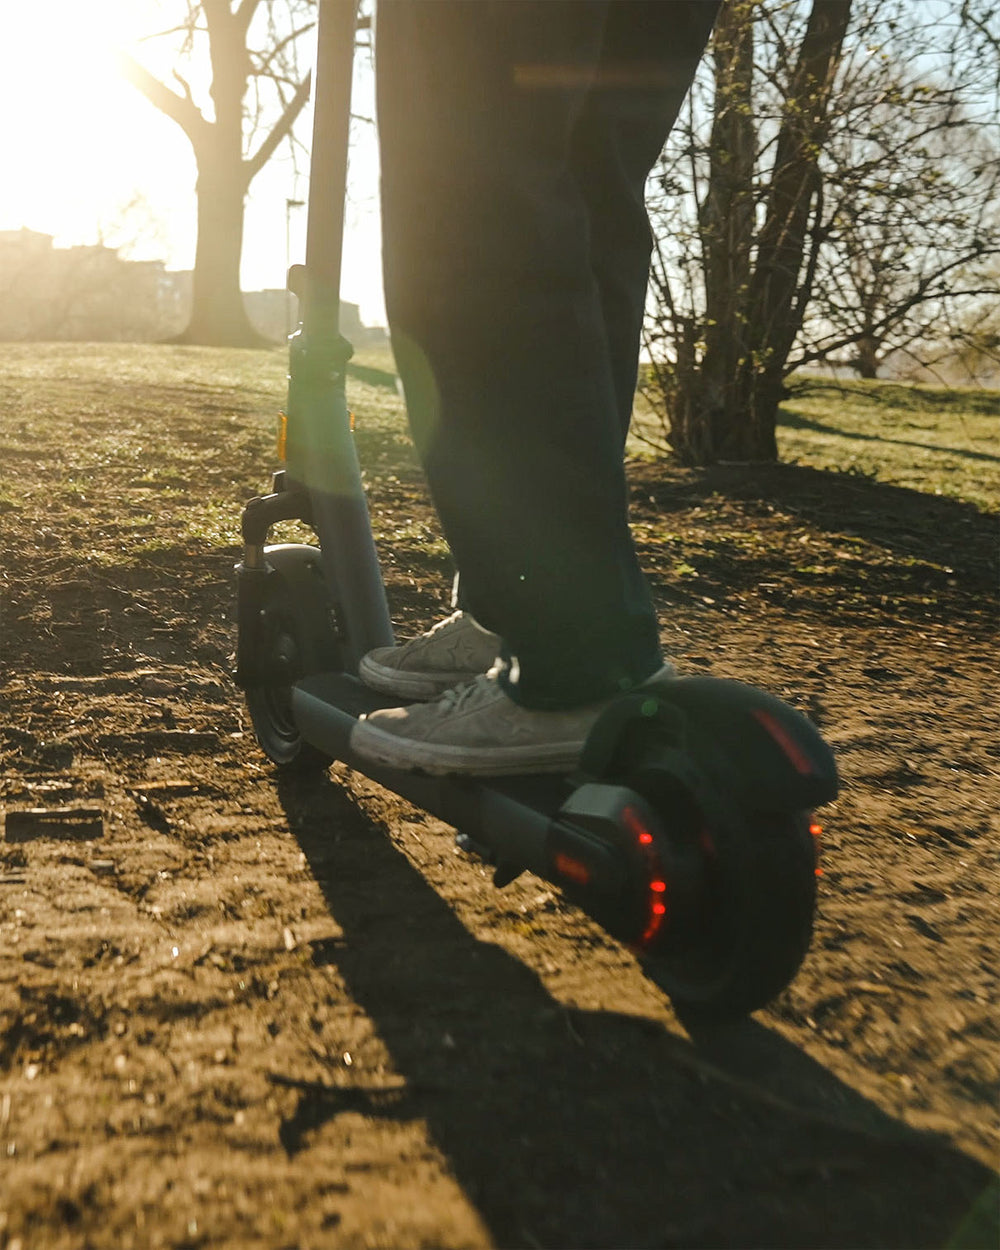 a man riding electric scooter on a muddy ground